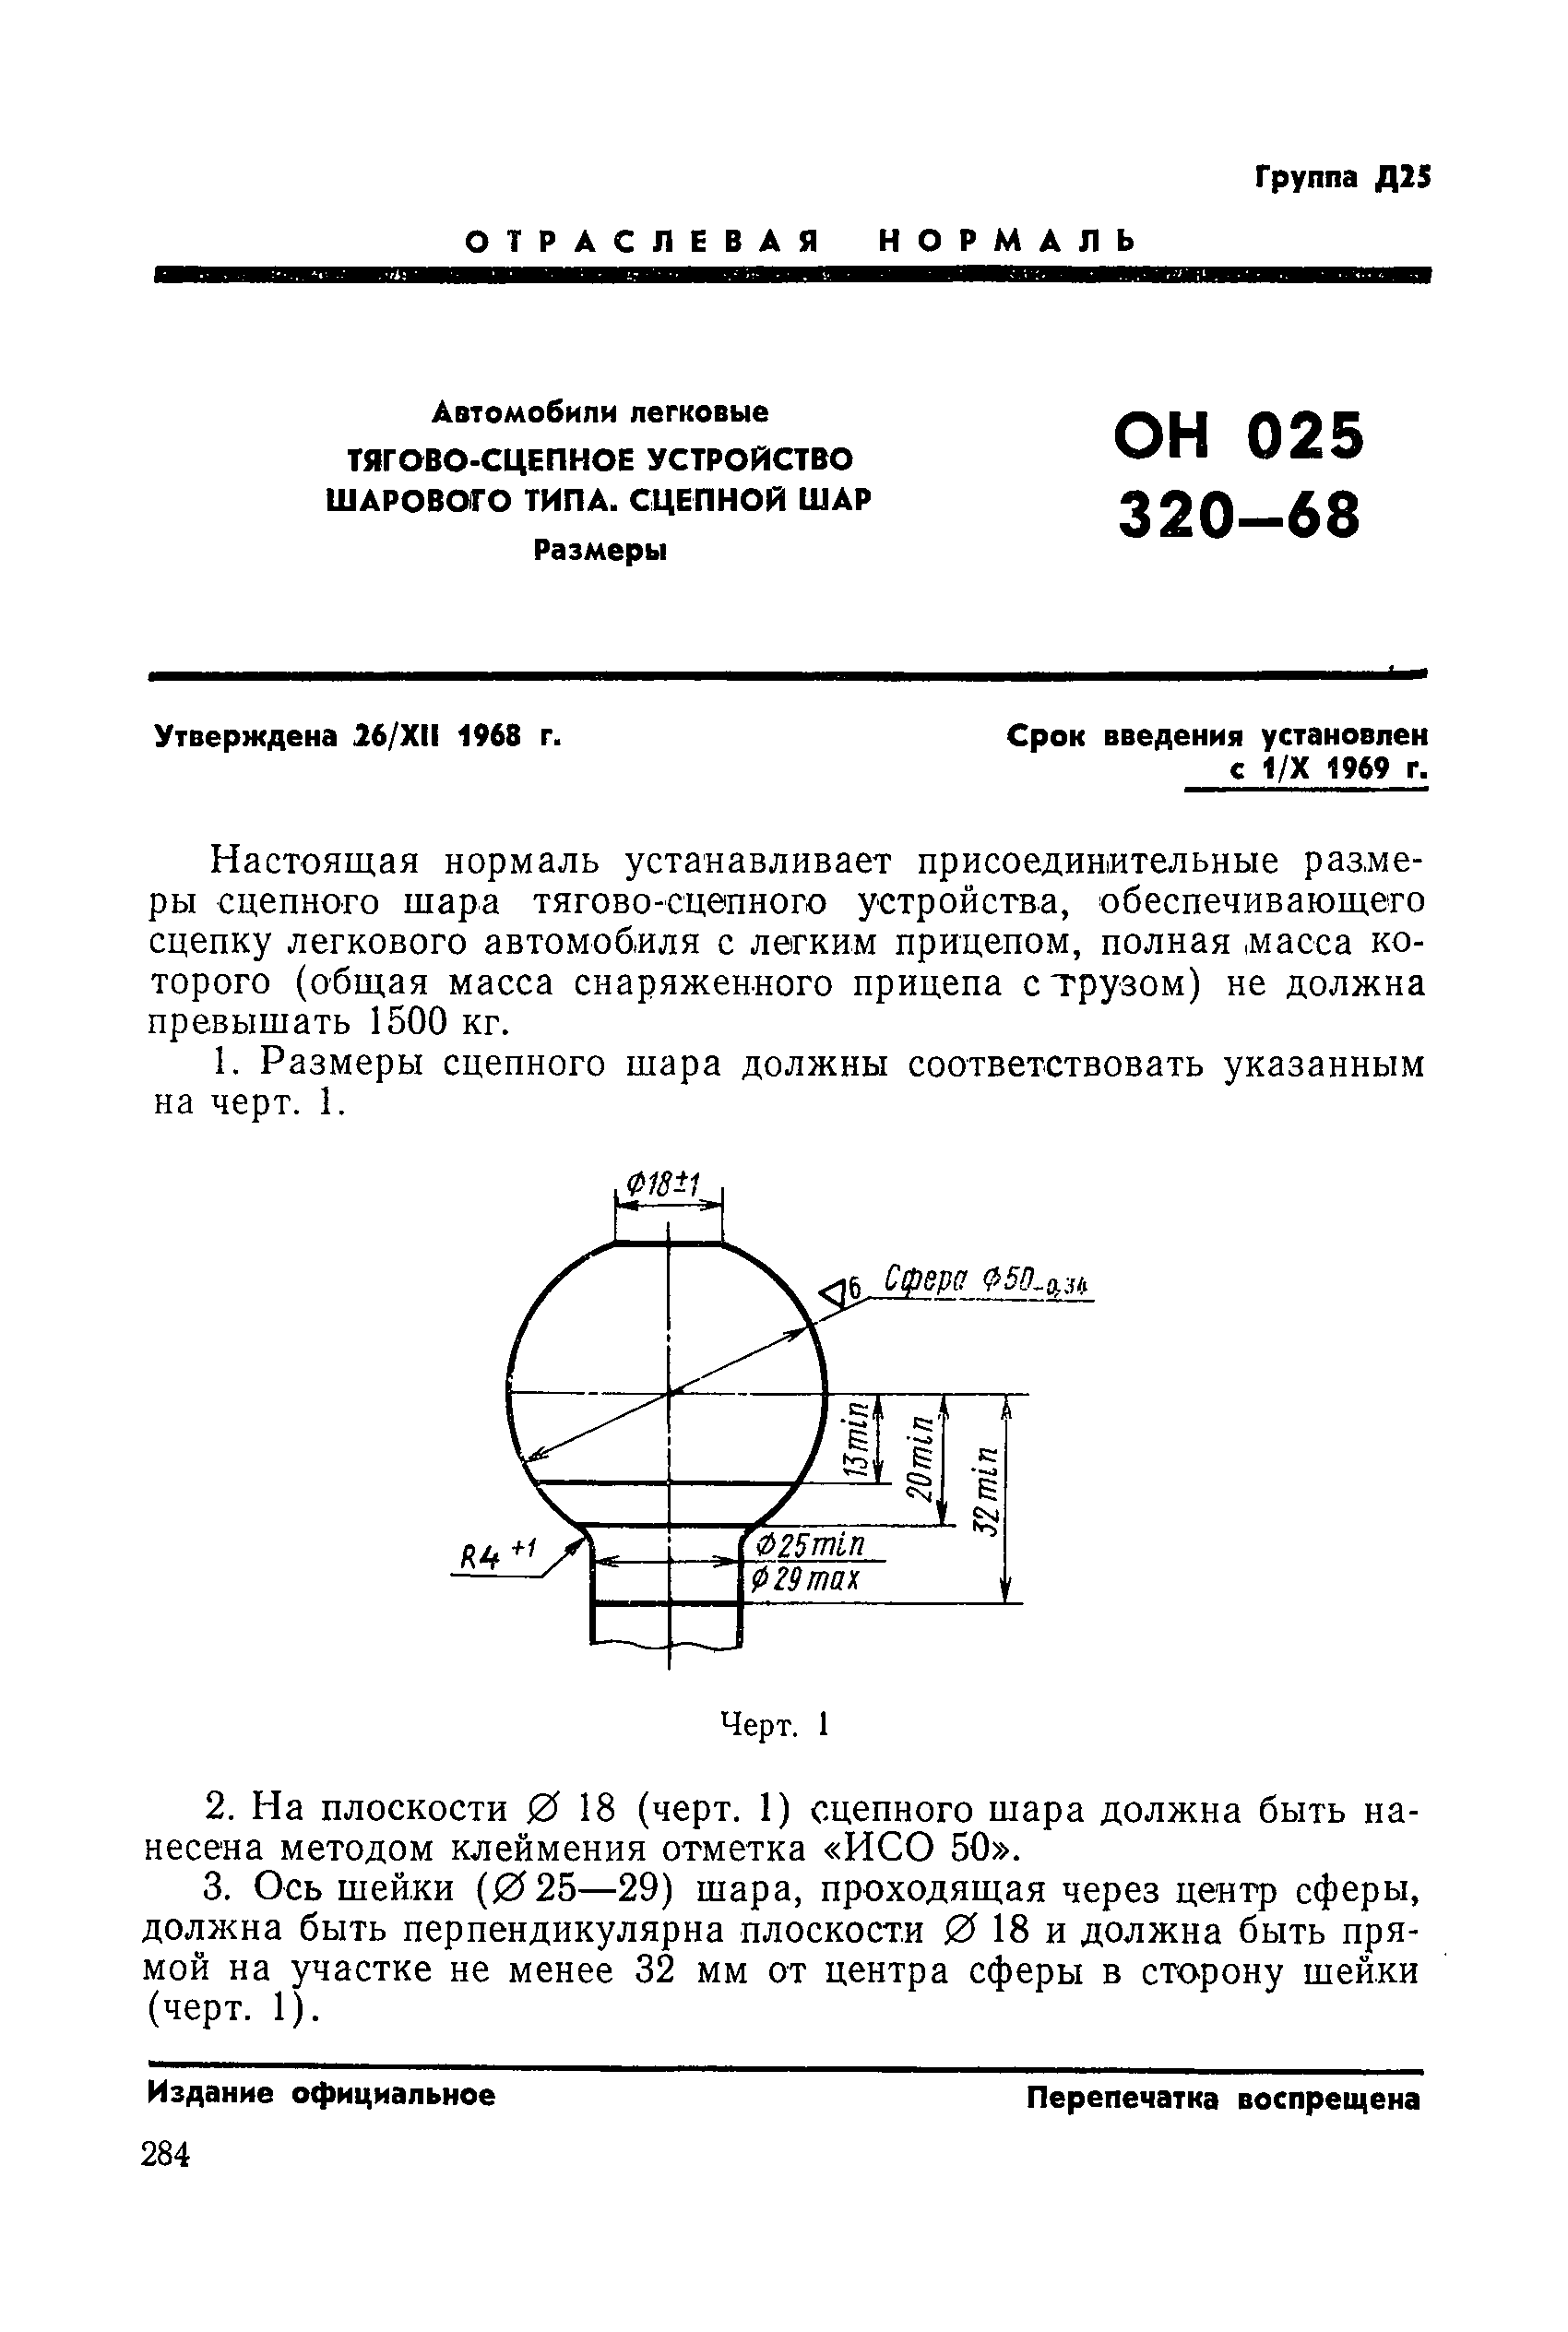 ОН 025 320-68